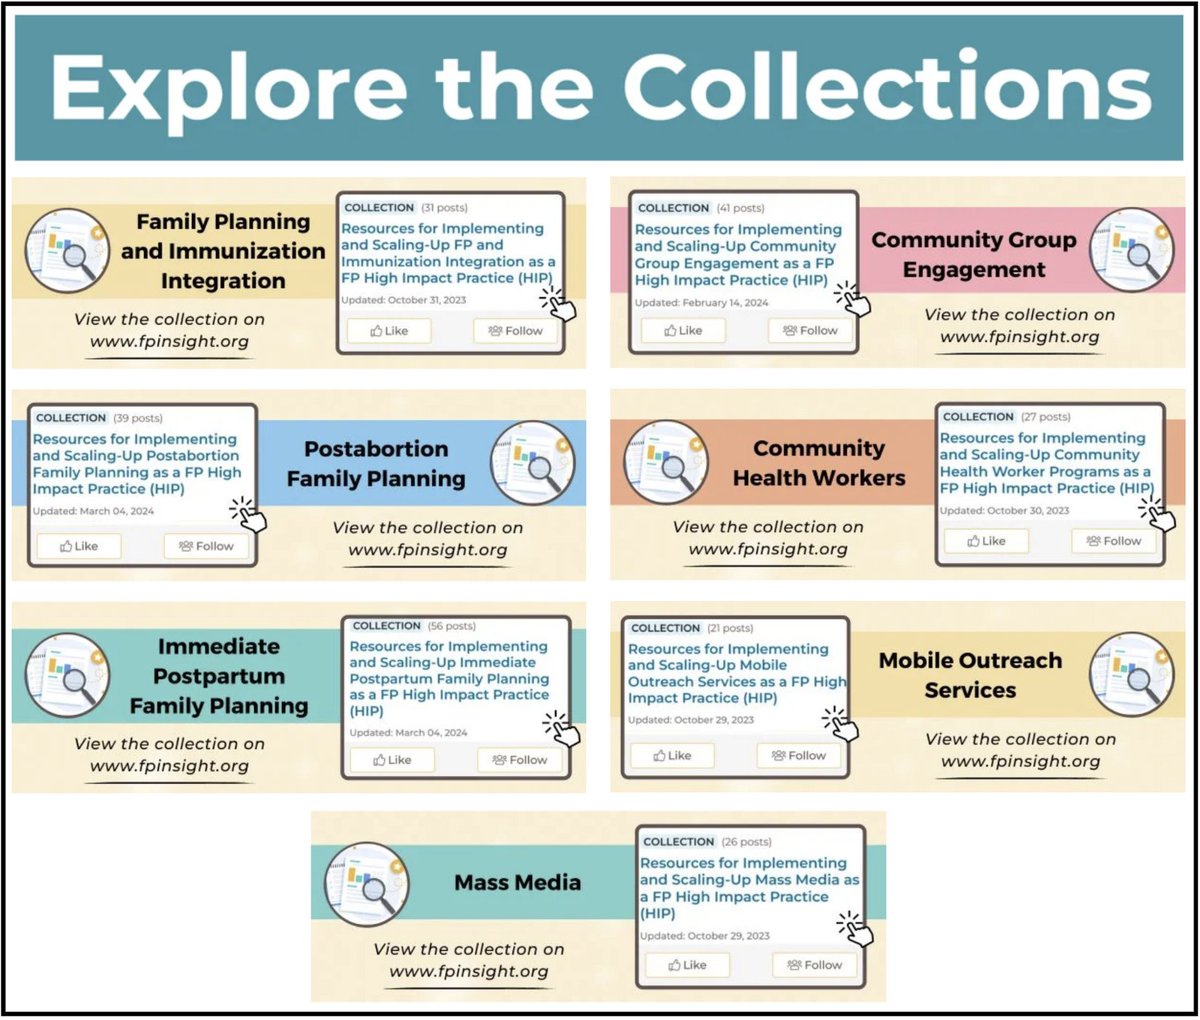 📣 JUST LAUNCHED: 7 new resource collections to support the implementation of the family planning HIPs are now on FP insight!

Explore resources on:
🤱🏾 PPFP
🚚 Mobile Outreach Services
💉 FP/Immunization Integration & more!

🔗: fphighimpactpractices.org/hips-curated-l… #HIPs4FP

@fprhknowledge